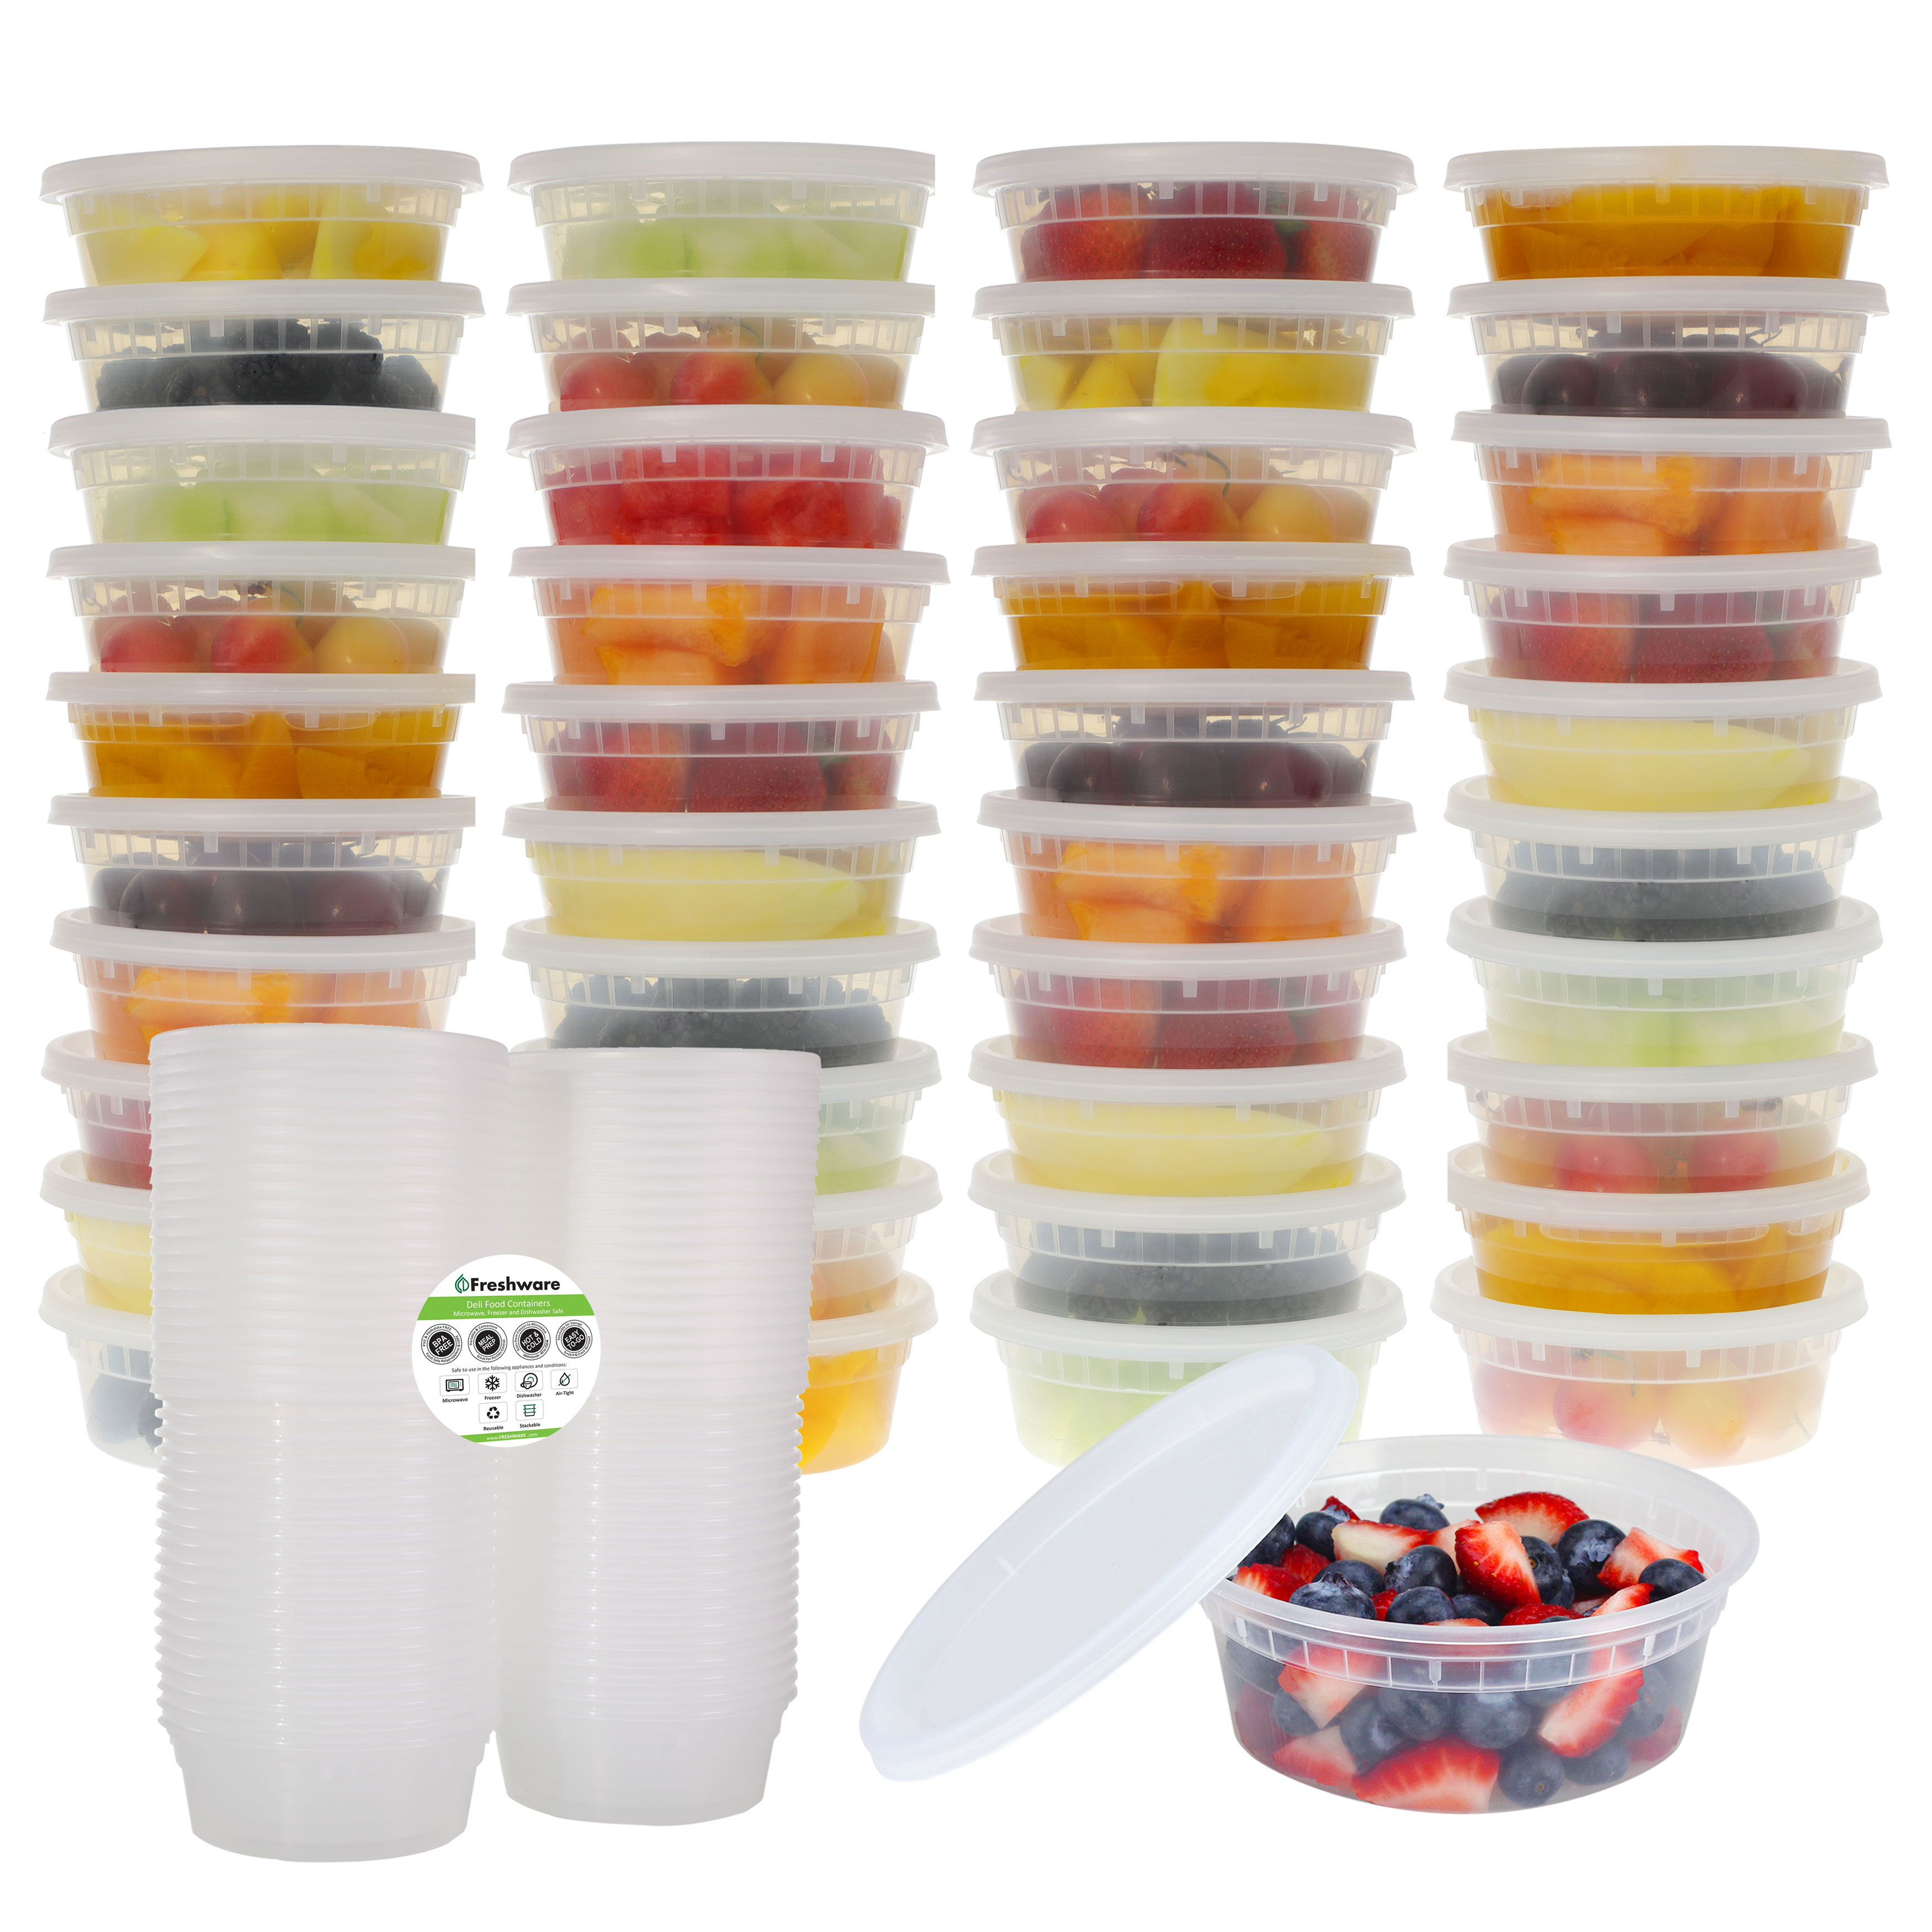 Freshware Plastic Food Storage Containers with Airtight Lids, 8 oz, 40-Pack